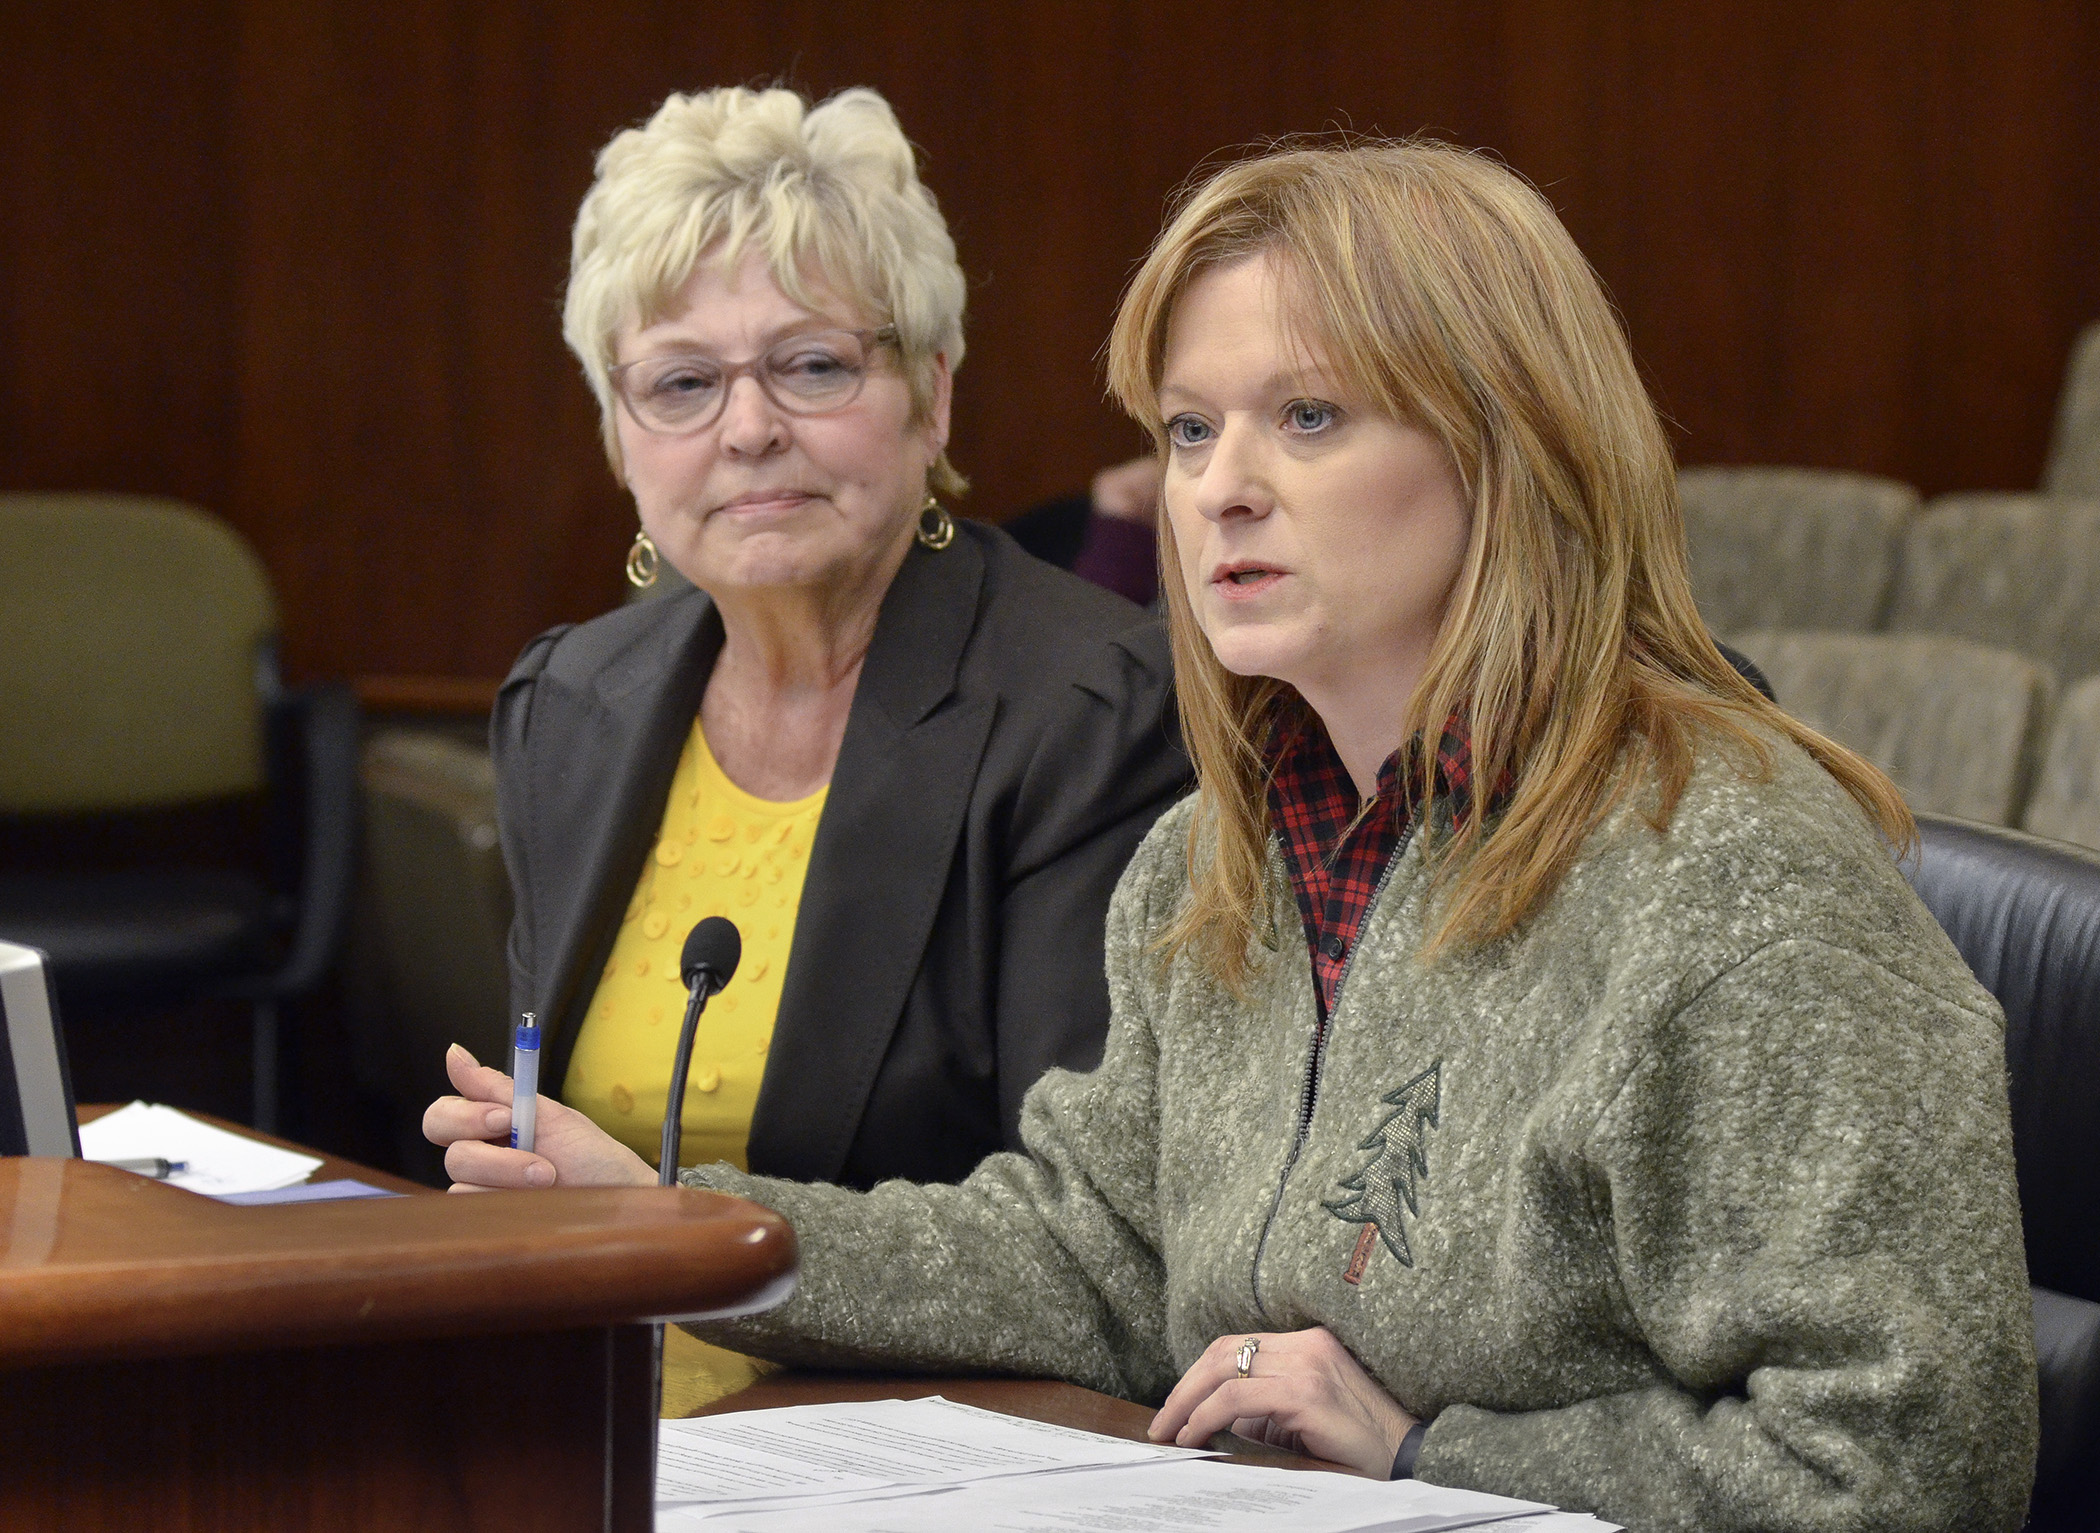 Karen McQuoid, owner of Mac’s Twin Bay resort in Isle, testifies before the House Mining and Outdoor Recreation Policy Committee Feb. 17 in support of a bill sponsored by Rep. Sondra Erickson, left, that would require the DNR to report on management costs for Lake Mille Lacs fisheries. Photo by Andrew VonBank